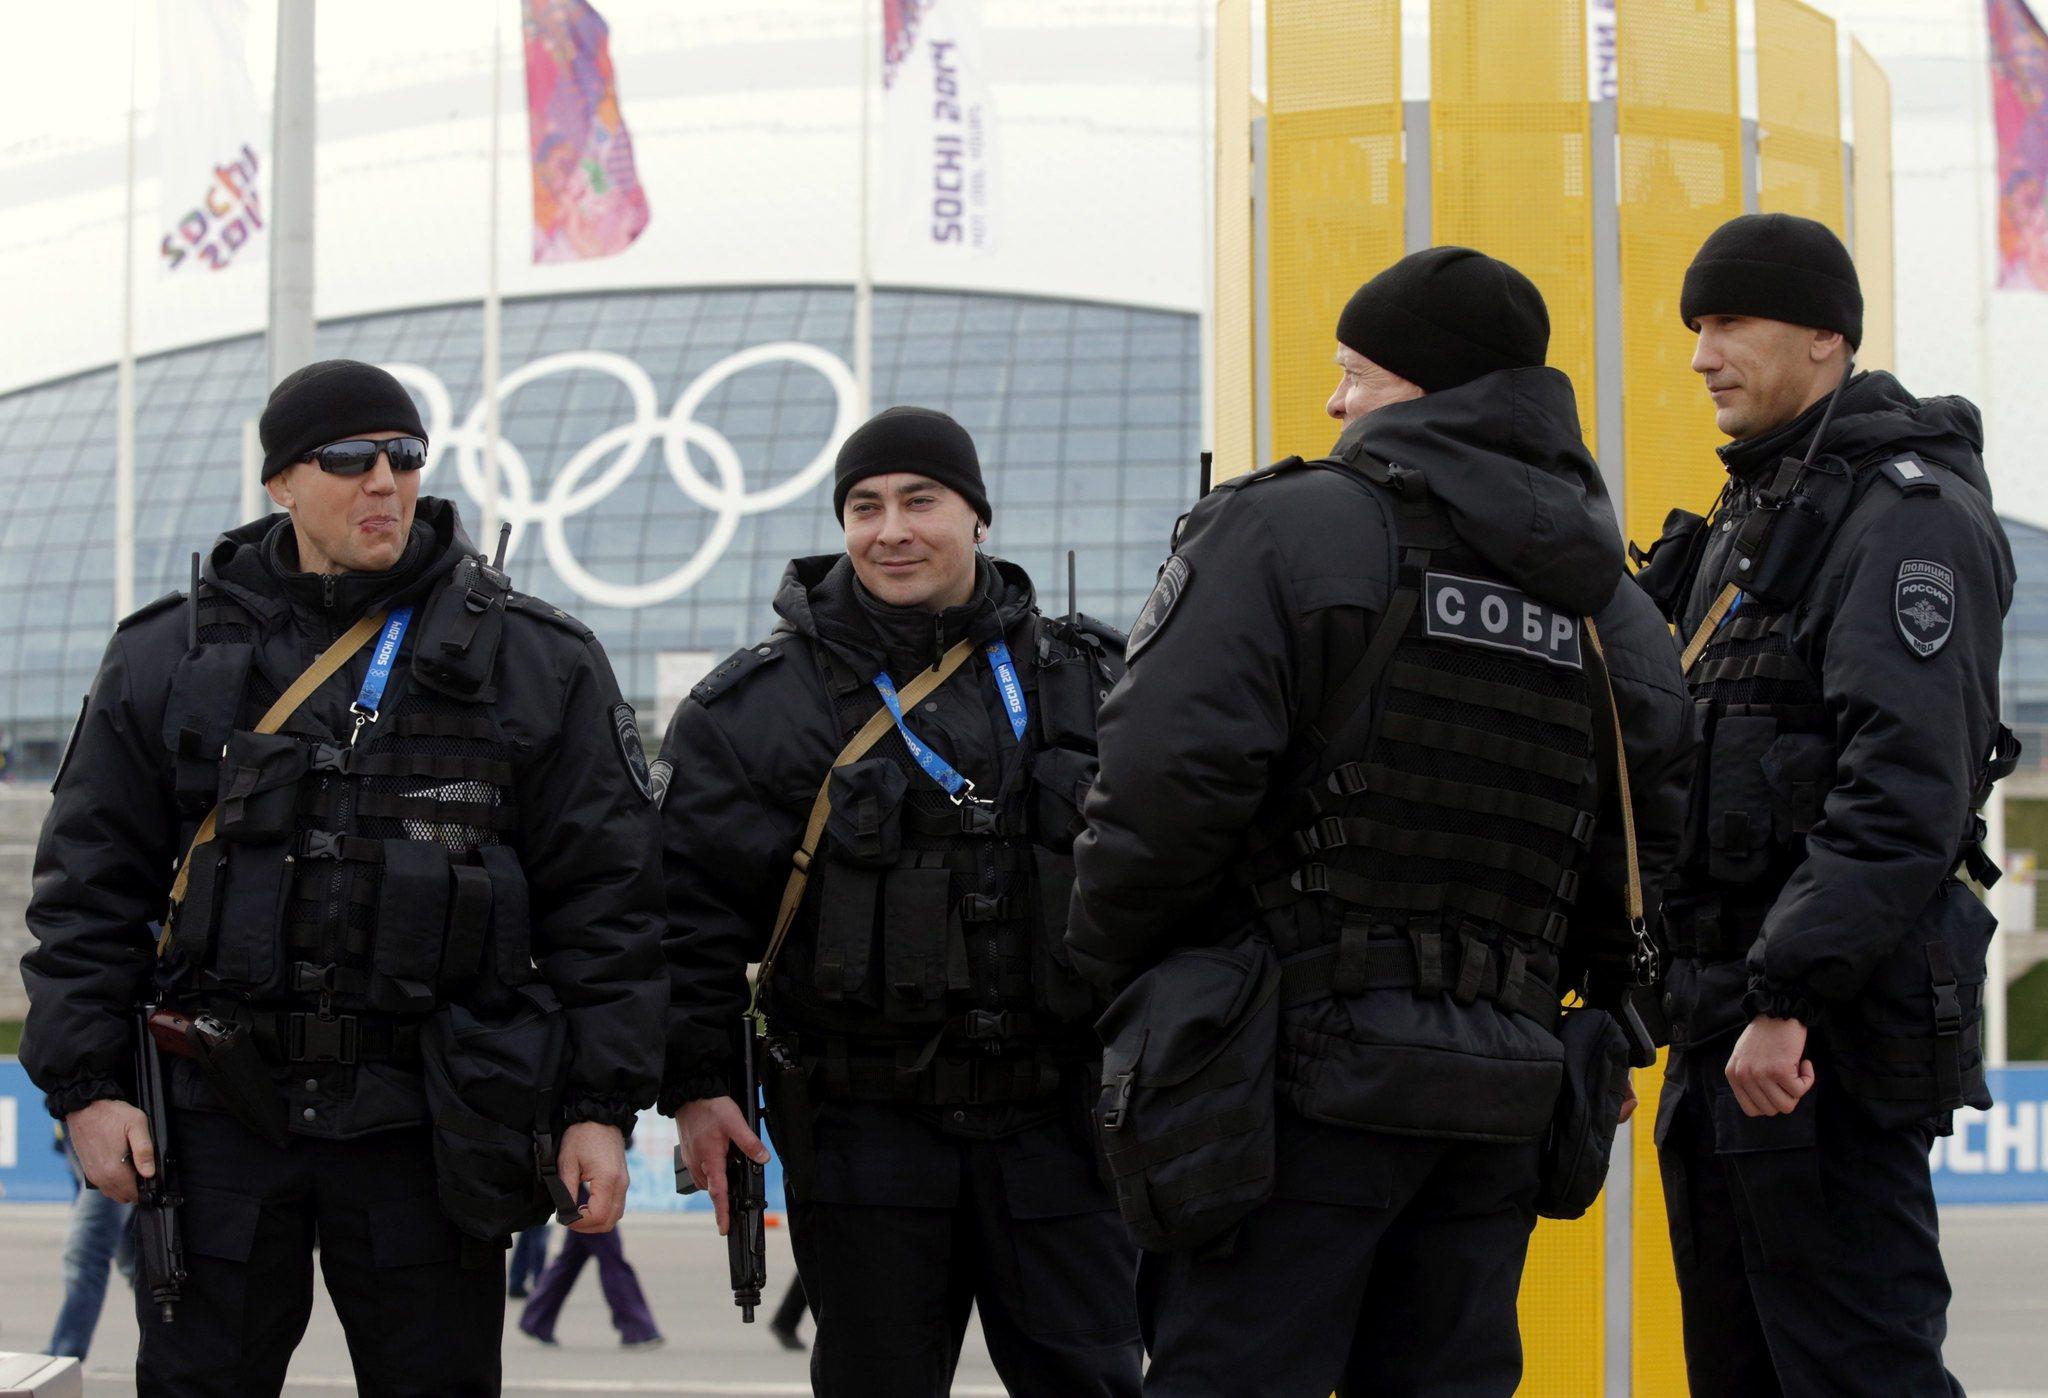 Russian special forces officers in the Olympic Park in Sochi, Russia. at the 2014 Winter Games.